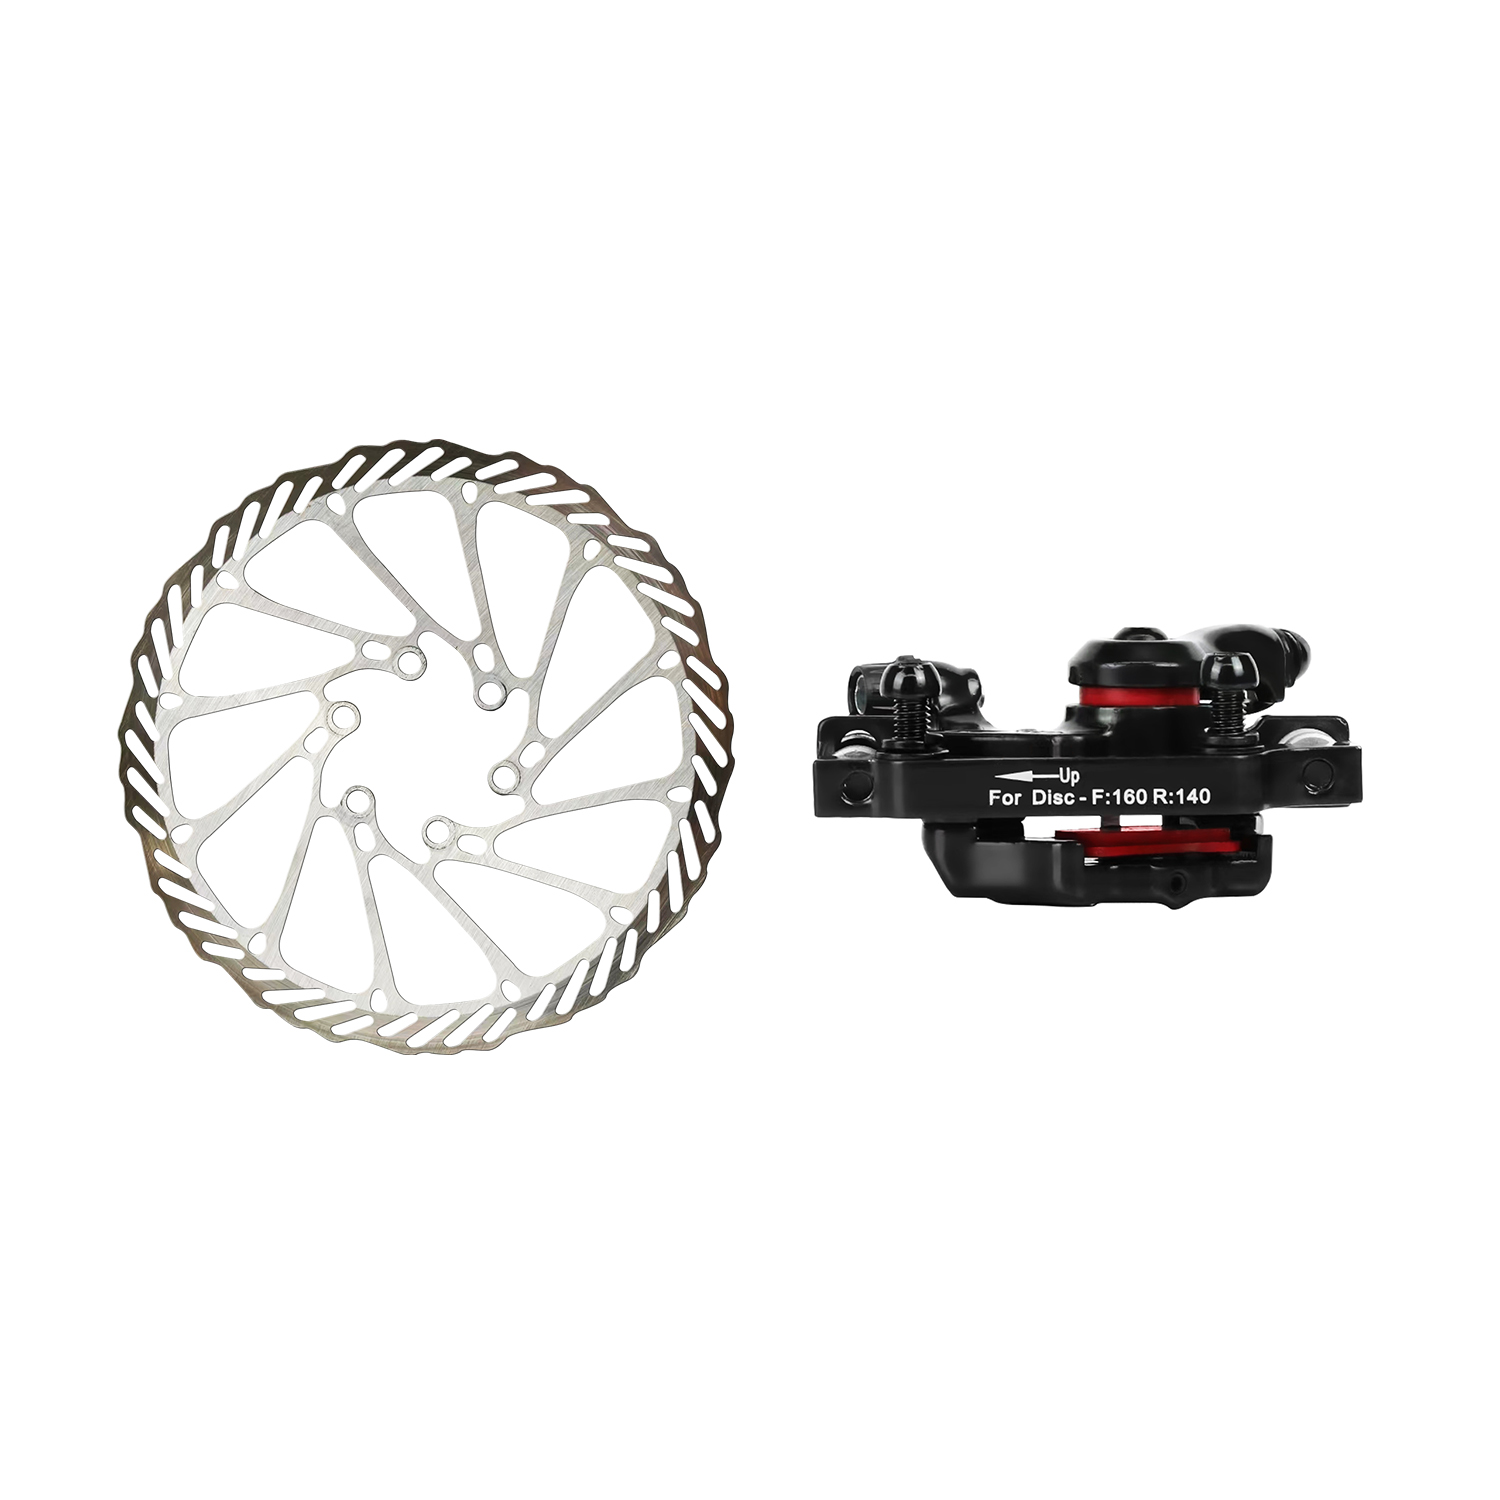 Rear Brake regulator only for Sciiti 100 electric bicycle